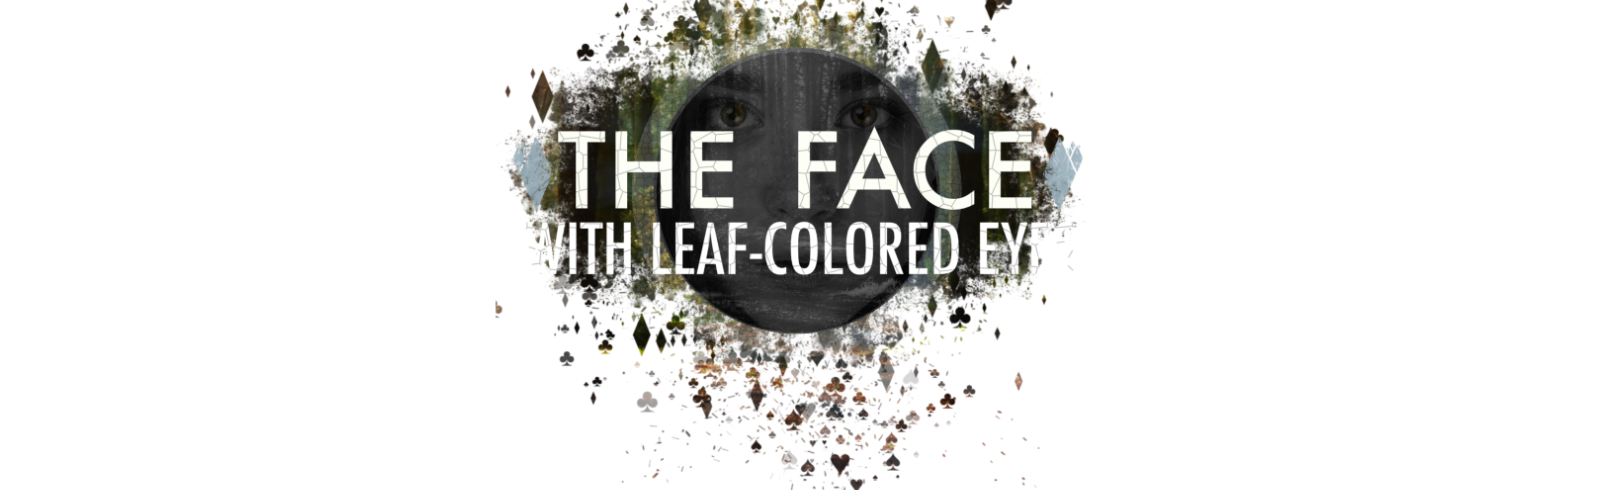 The Face With Leaf-Colored Eyes